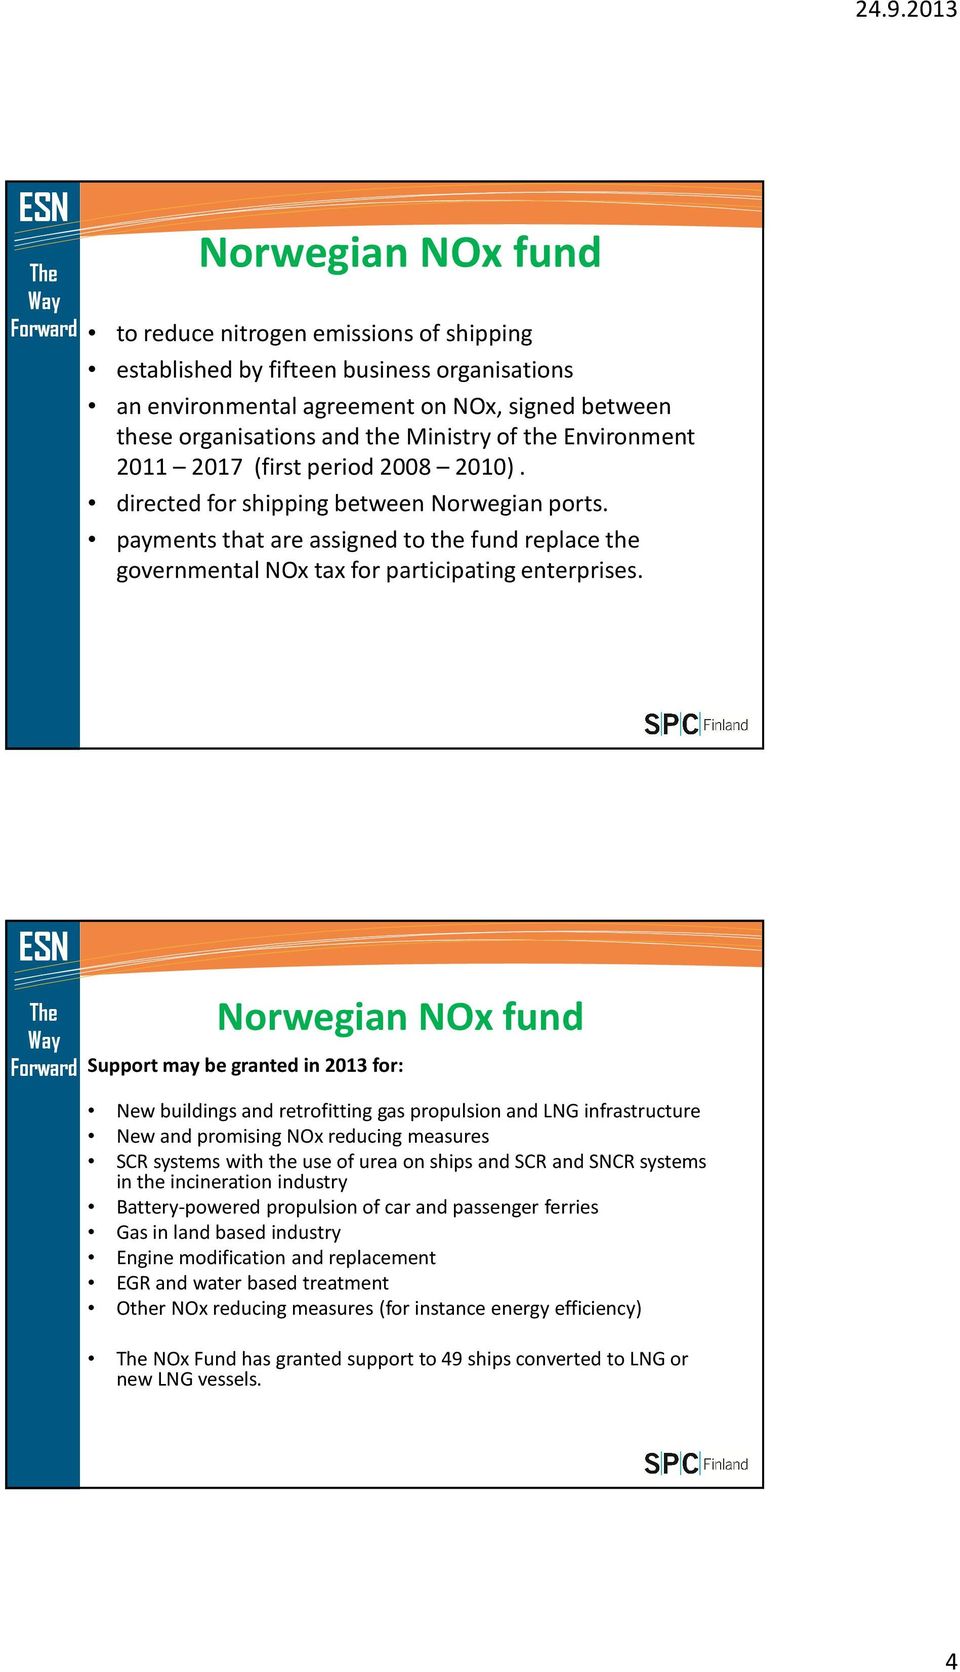 Norwegian NOx fund Support may be granted in 2013 for: New buildings and retrofitting gas propulsion and LNG infrastructure New and promising NOx reducing measures SCR systems with the use of urea on